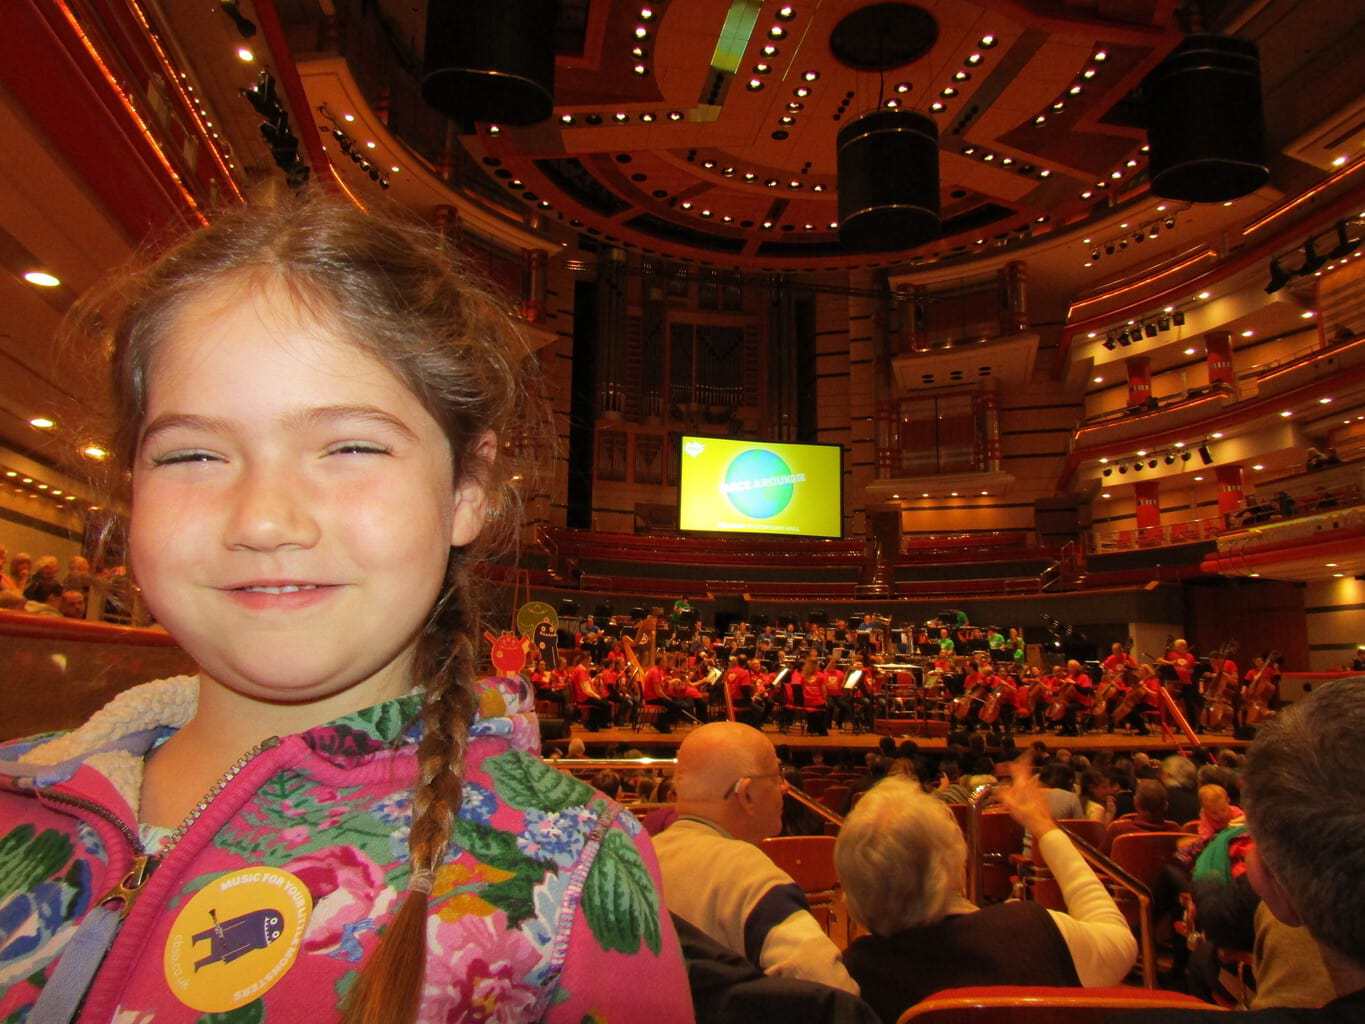 City of Birmingham Symphony Orchestra (CBSO) Family Concert 'Dance around the World'